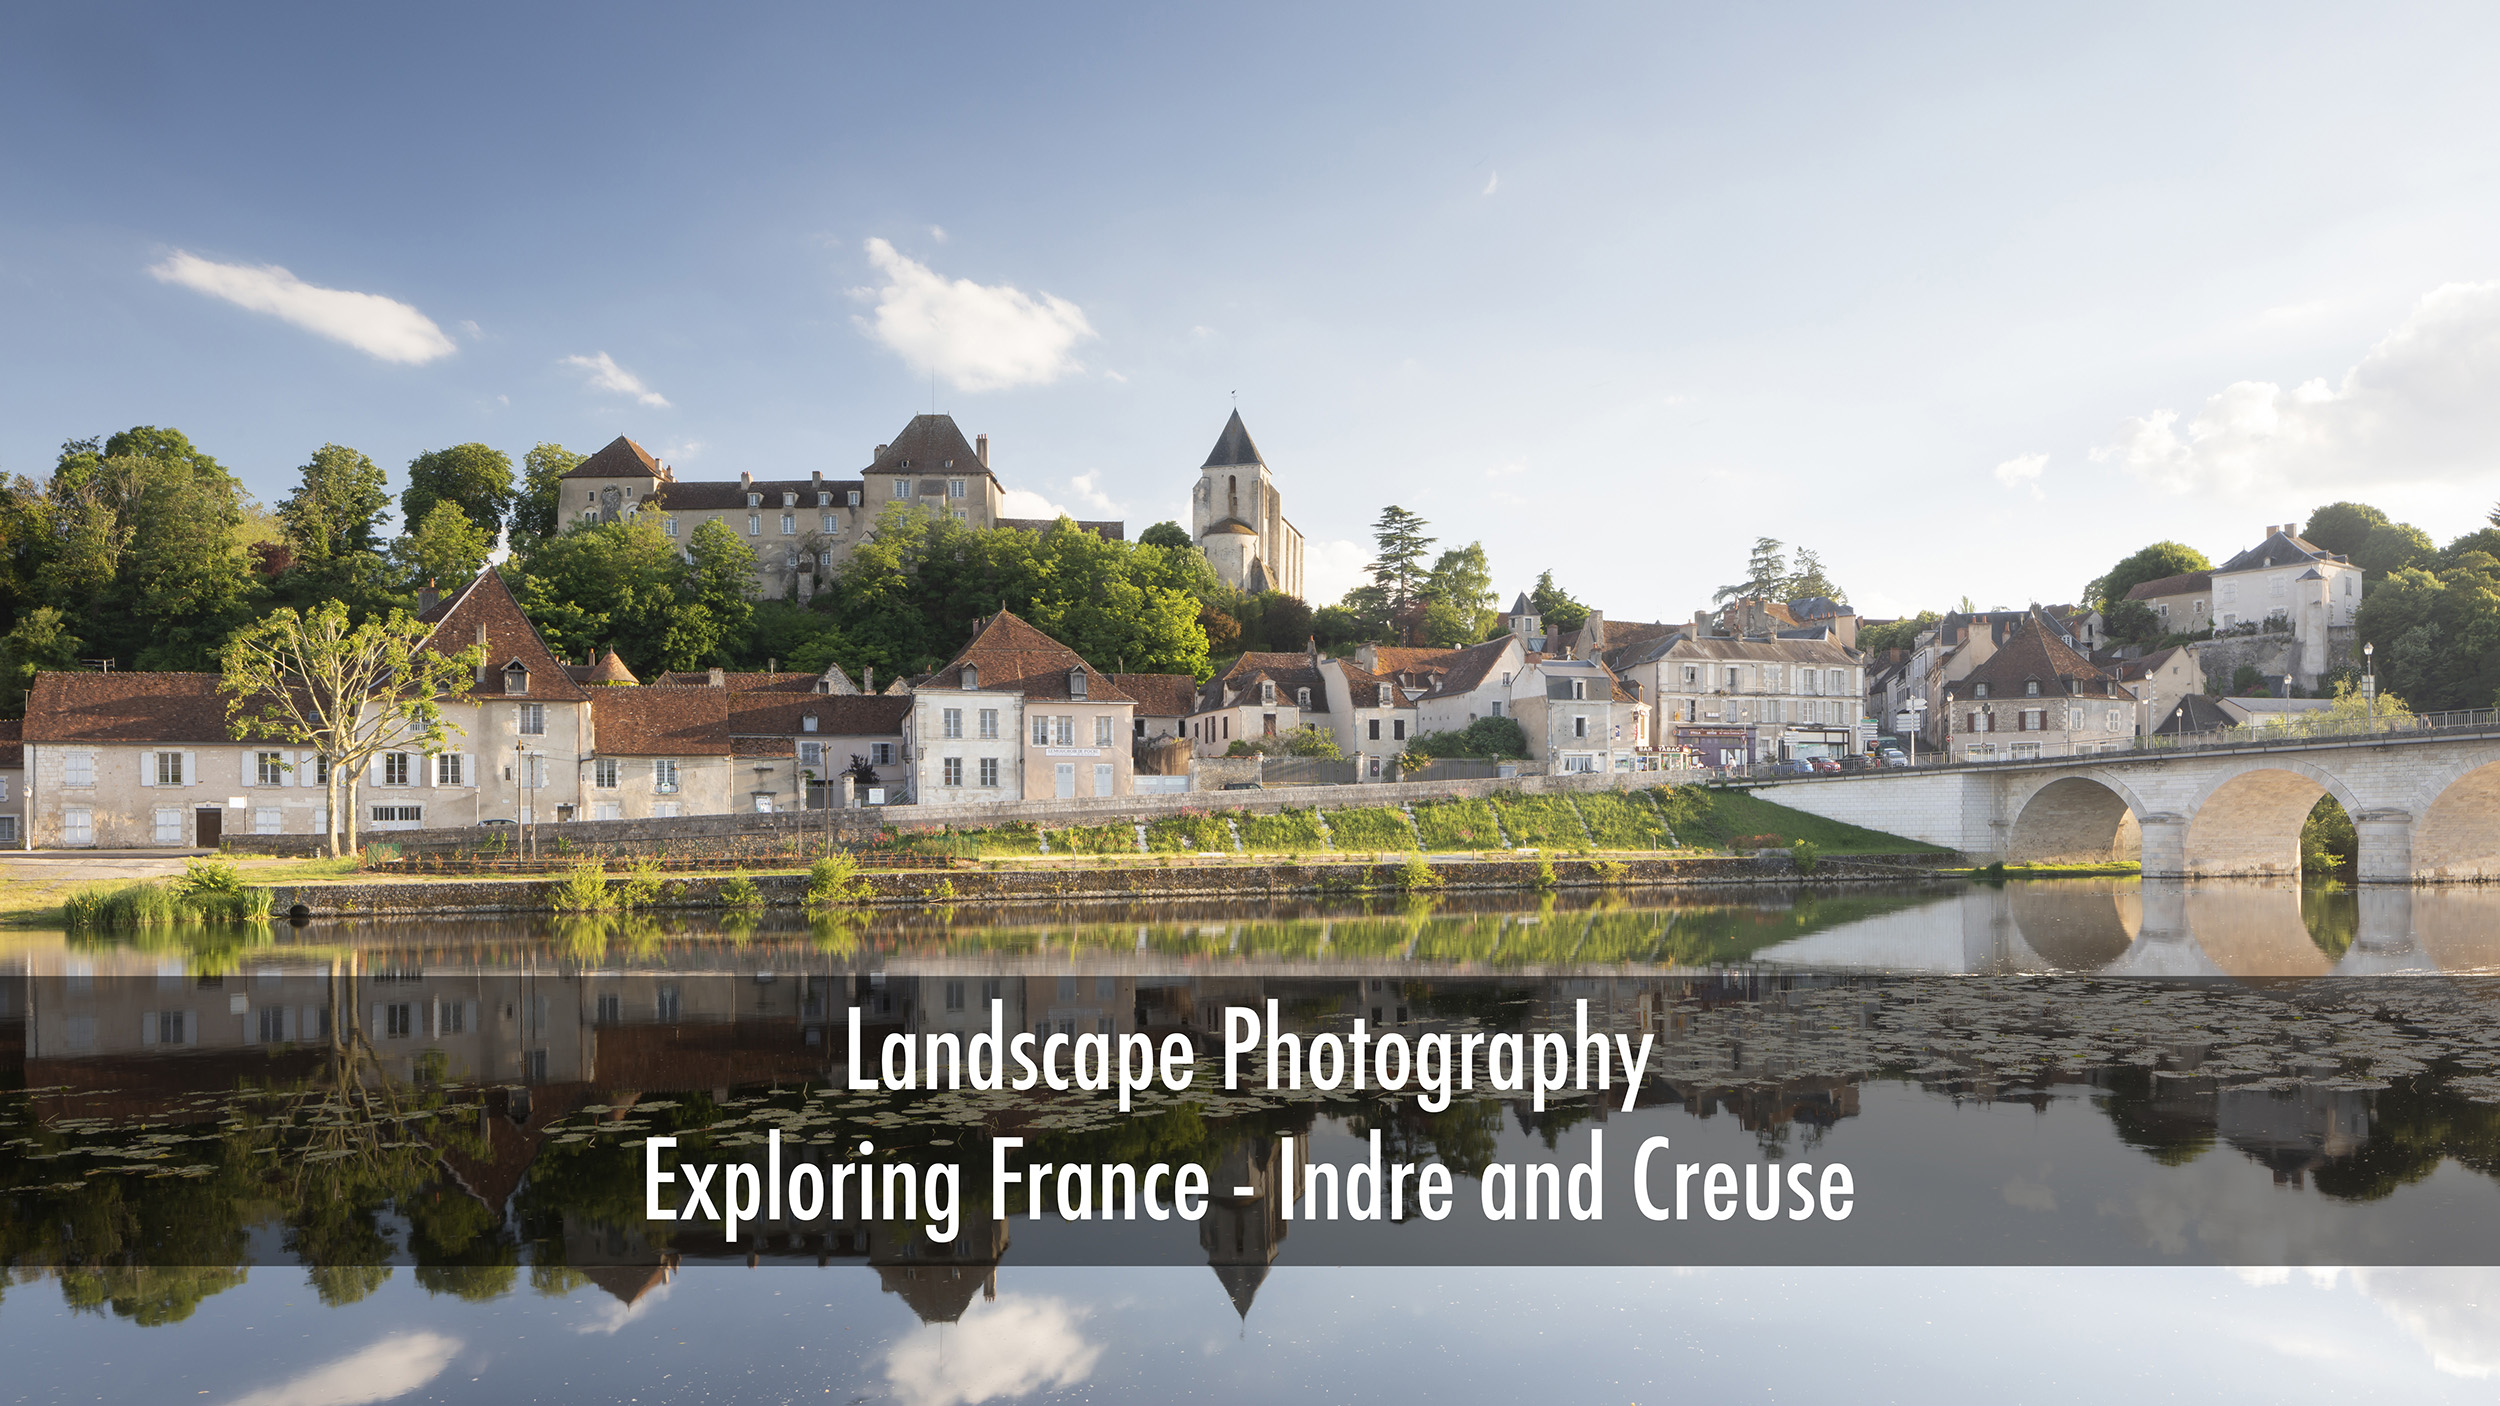 Exploring the departments of Indre and Creuse in France. Landscape photography.